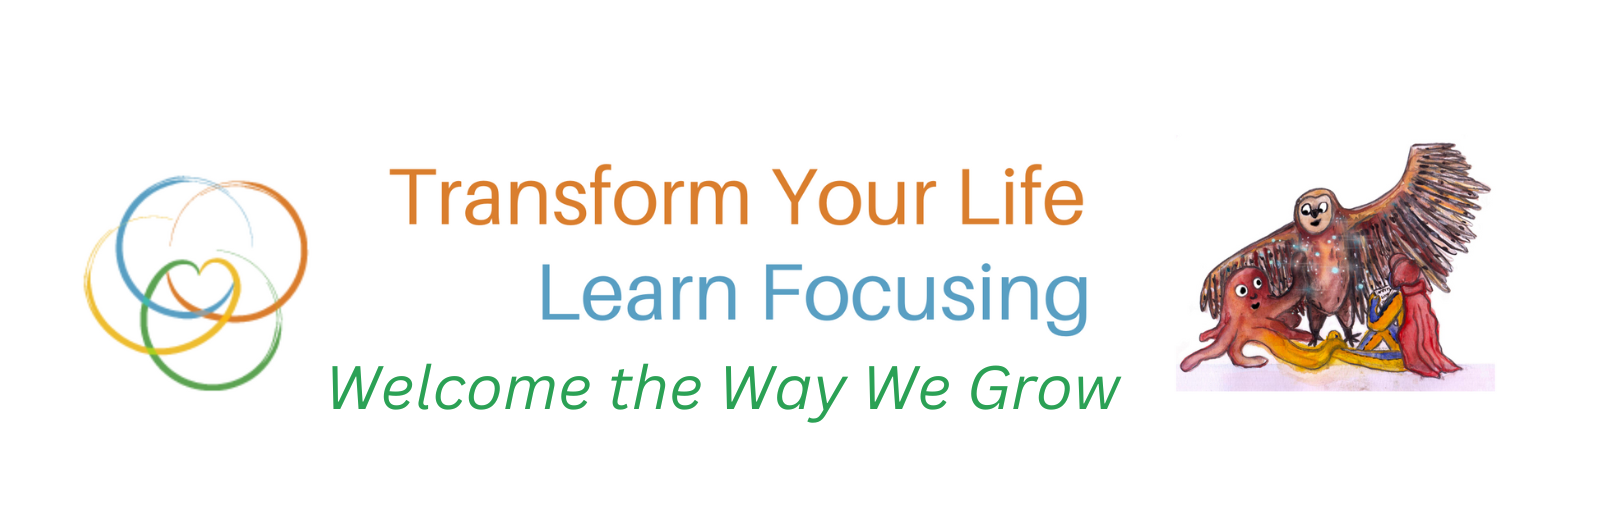 Transform Your Life, Learn Focusing, Welcome the Way We Grow